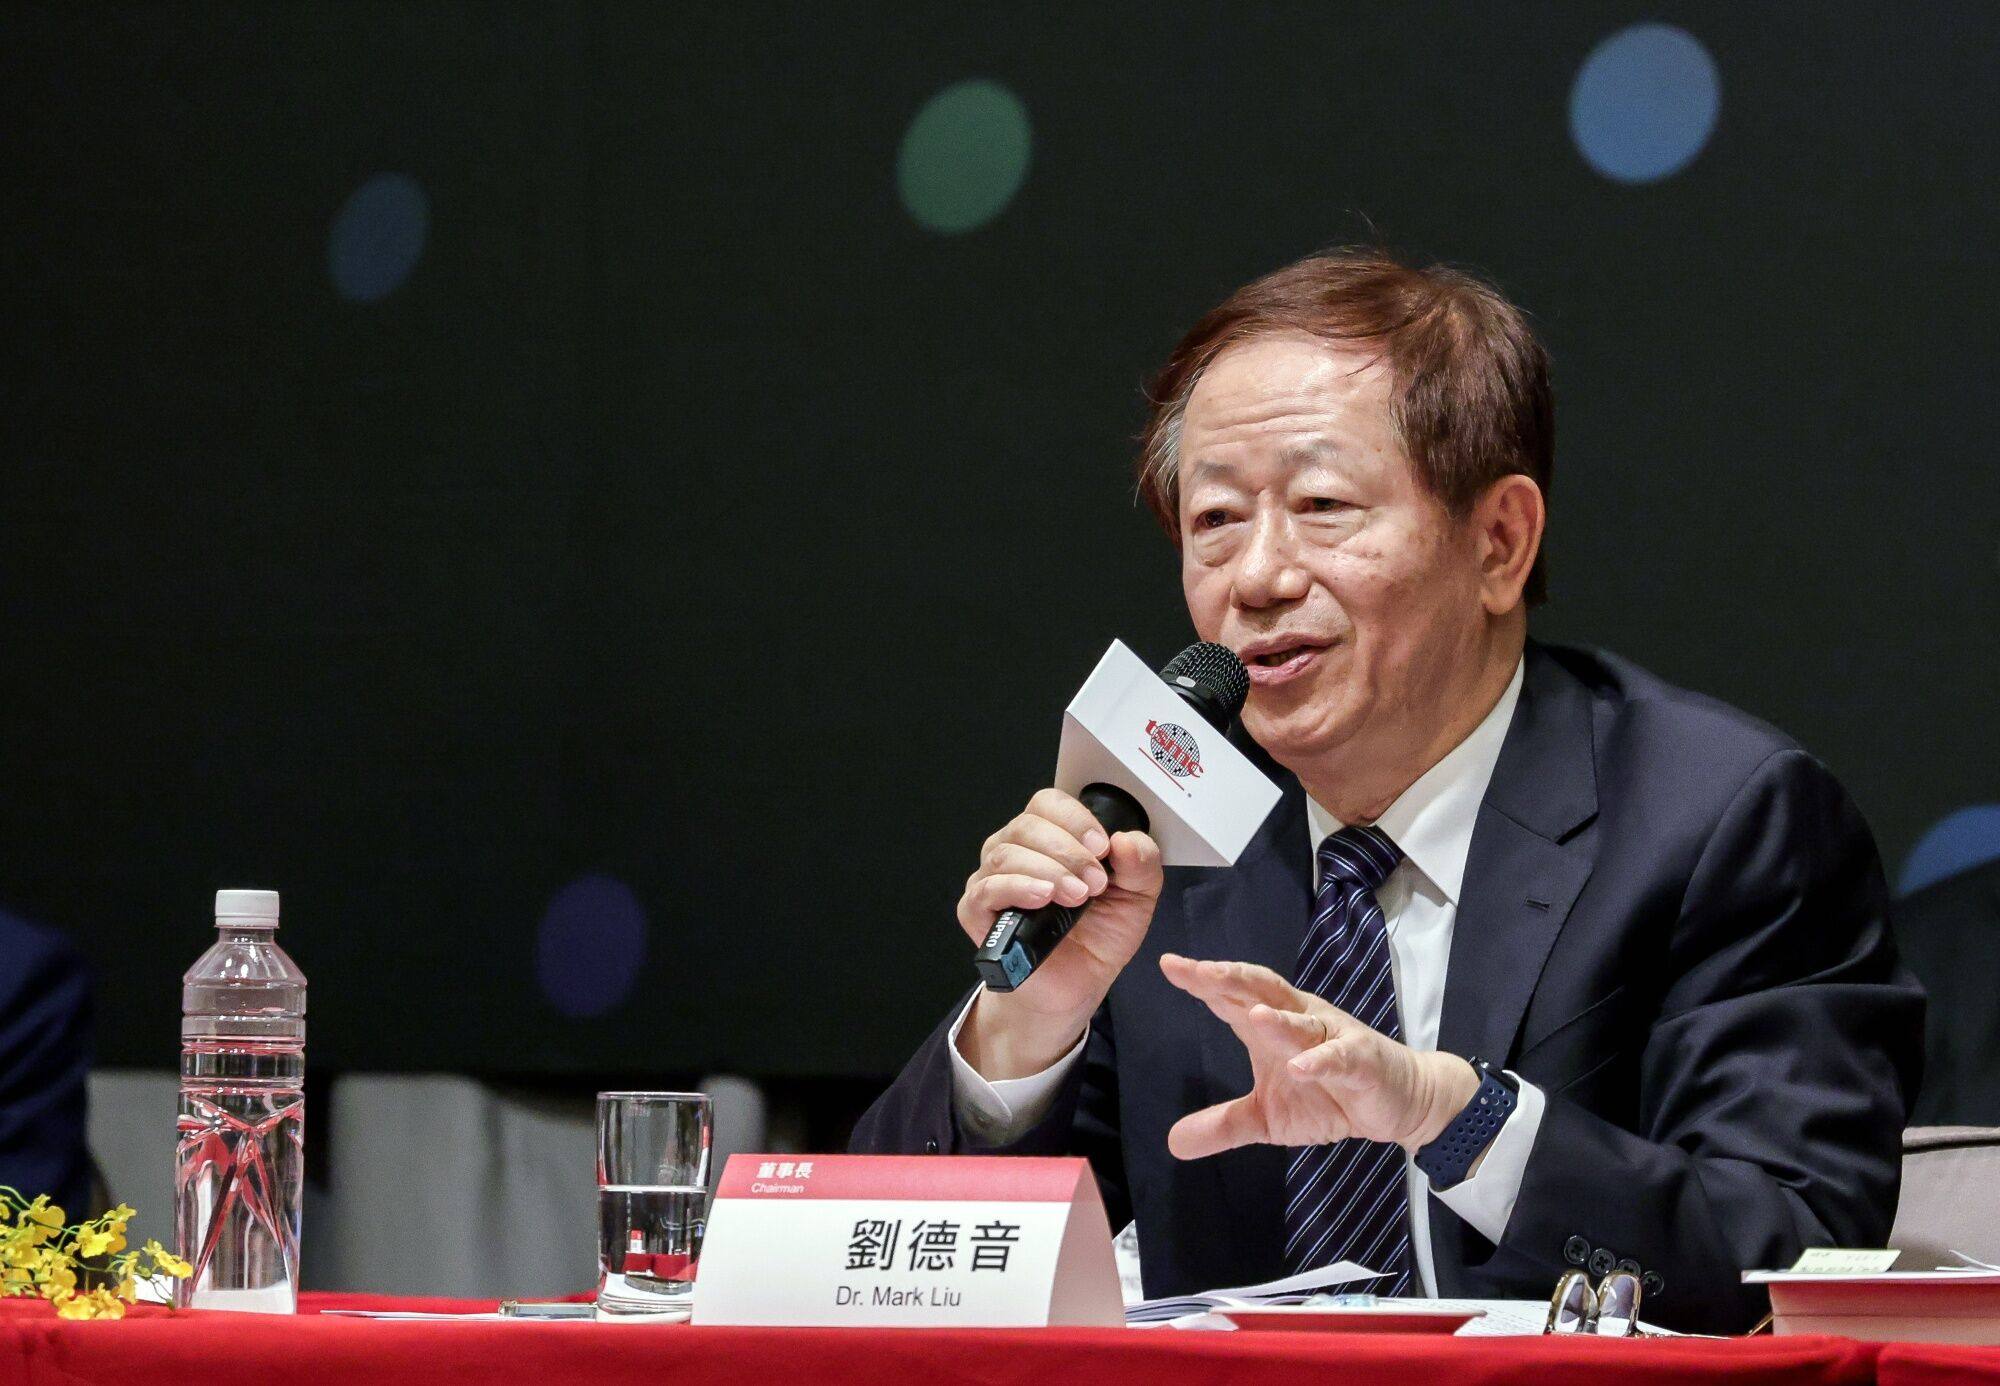 Mark Liu, chairman of Taiwan Semiconductor Manufacturing Co. (TSMC),   said Taiwan’s semiconductor industry “plays a stabilising role amid global geopolitical tensions”. Photo: I-Hwa Cheng/Bloomberg